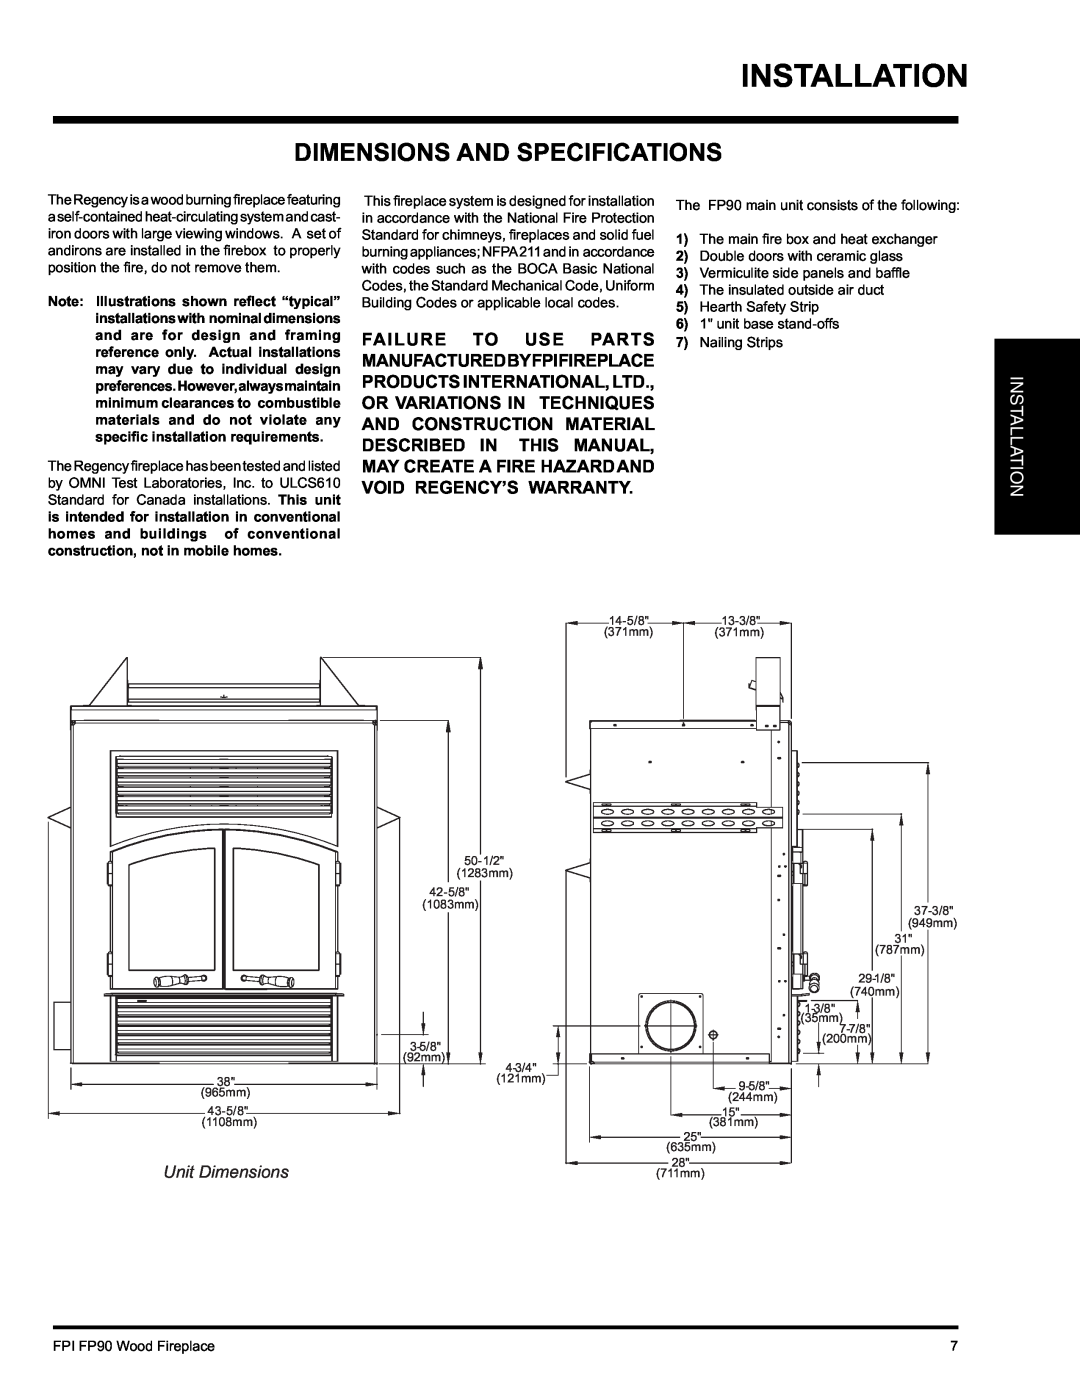 Regency FP90 installation manual Dimensions And Specifications, Installation, Unit Dimensions 